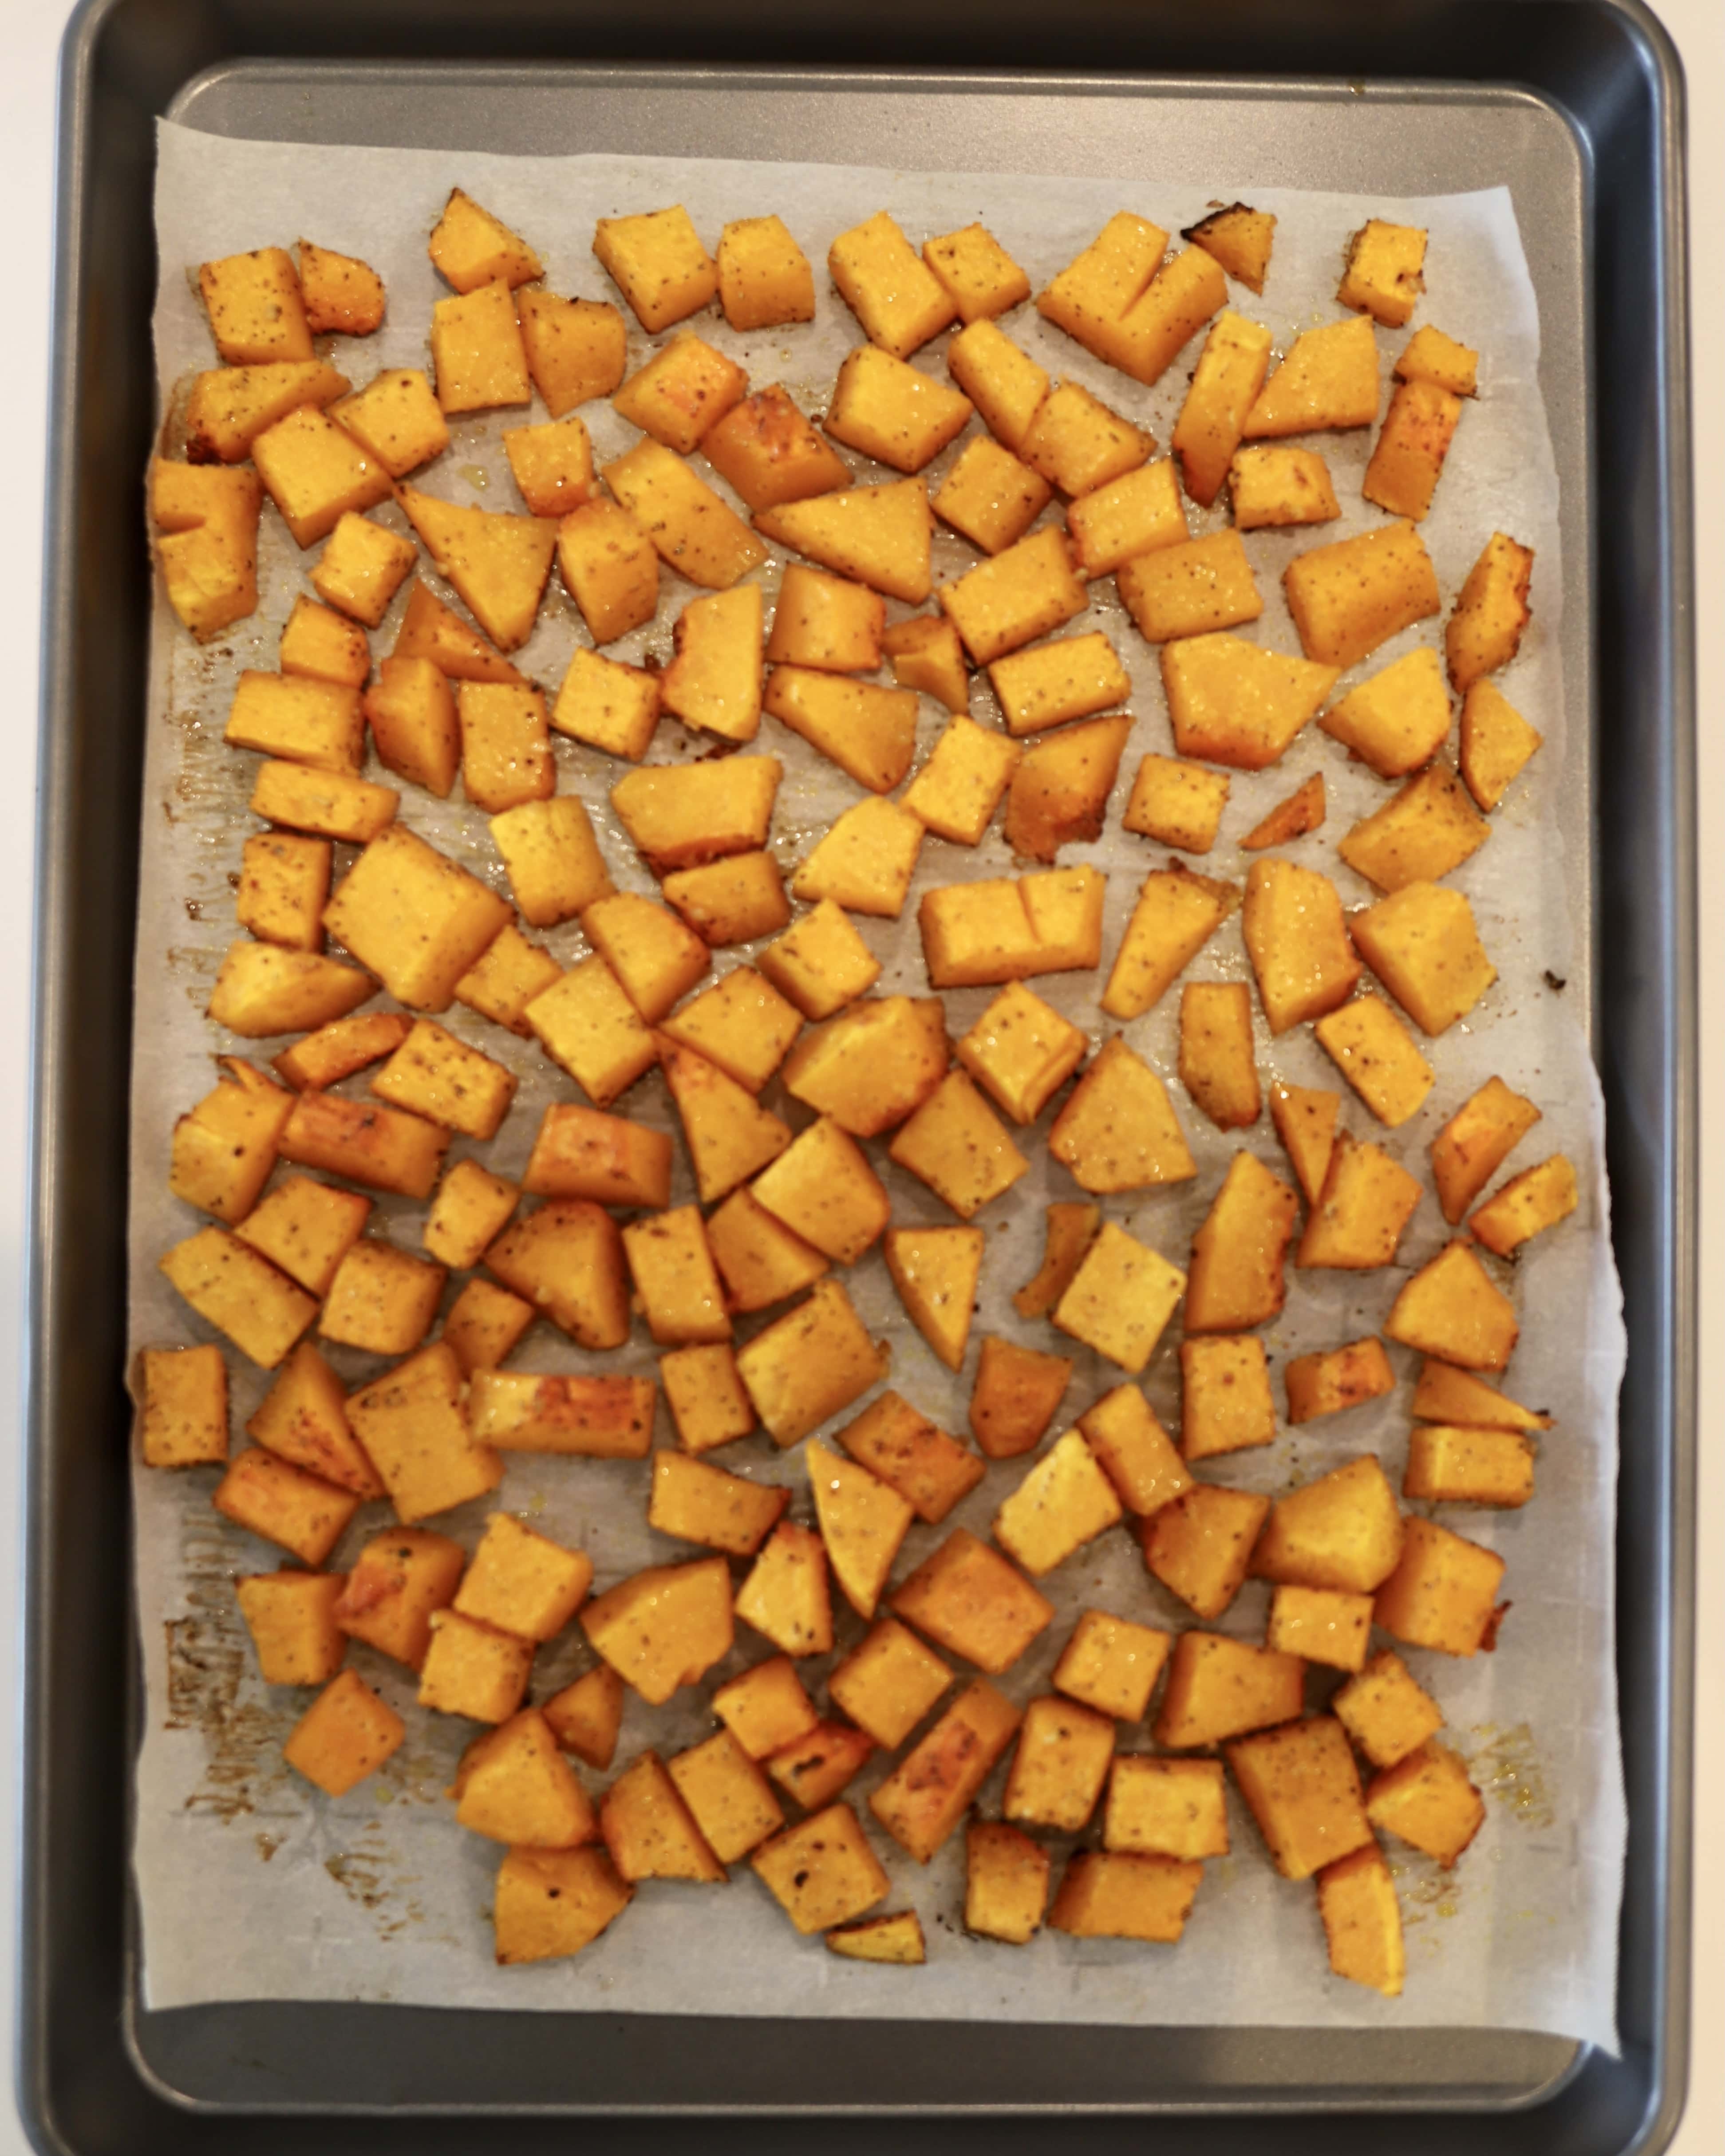 Roasted cubed butternut squash